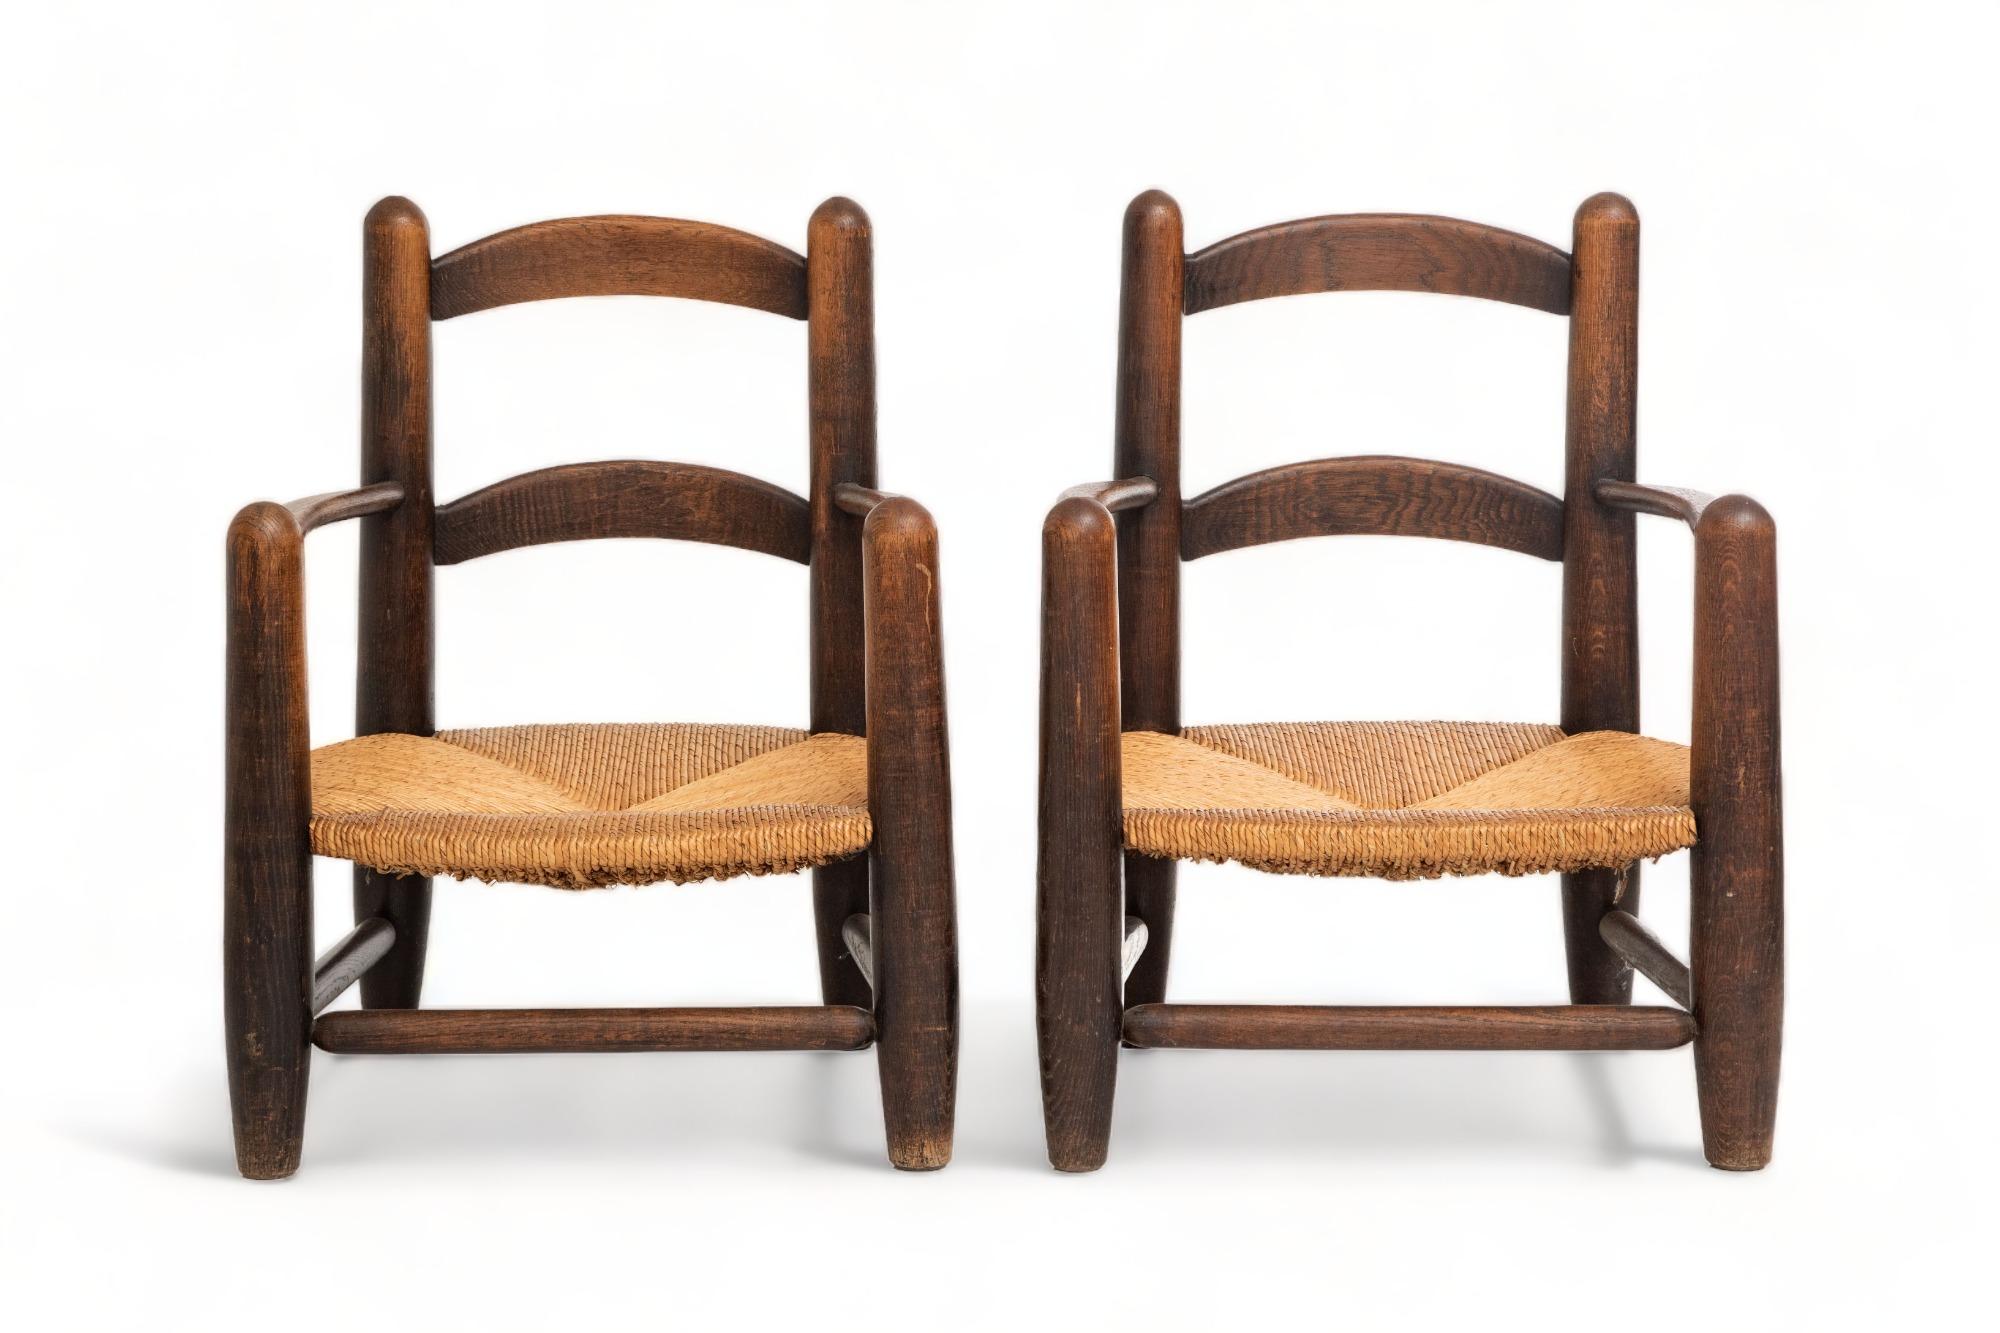 Pair of oak rush seats armchairs, France, 1960's
Solid turned oak with outstanding patina and grain 
Handwoven rush seats which are in perfect original condition.
In the manner of Charlotte Perriand
 Used as fireplace armchairs
Ready to ship from